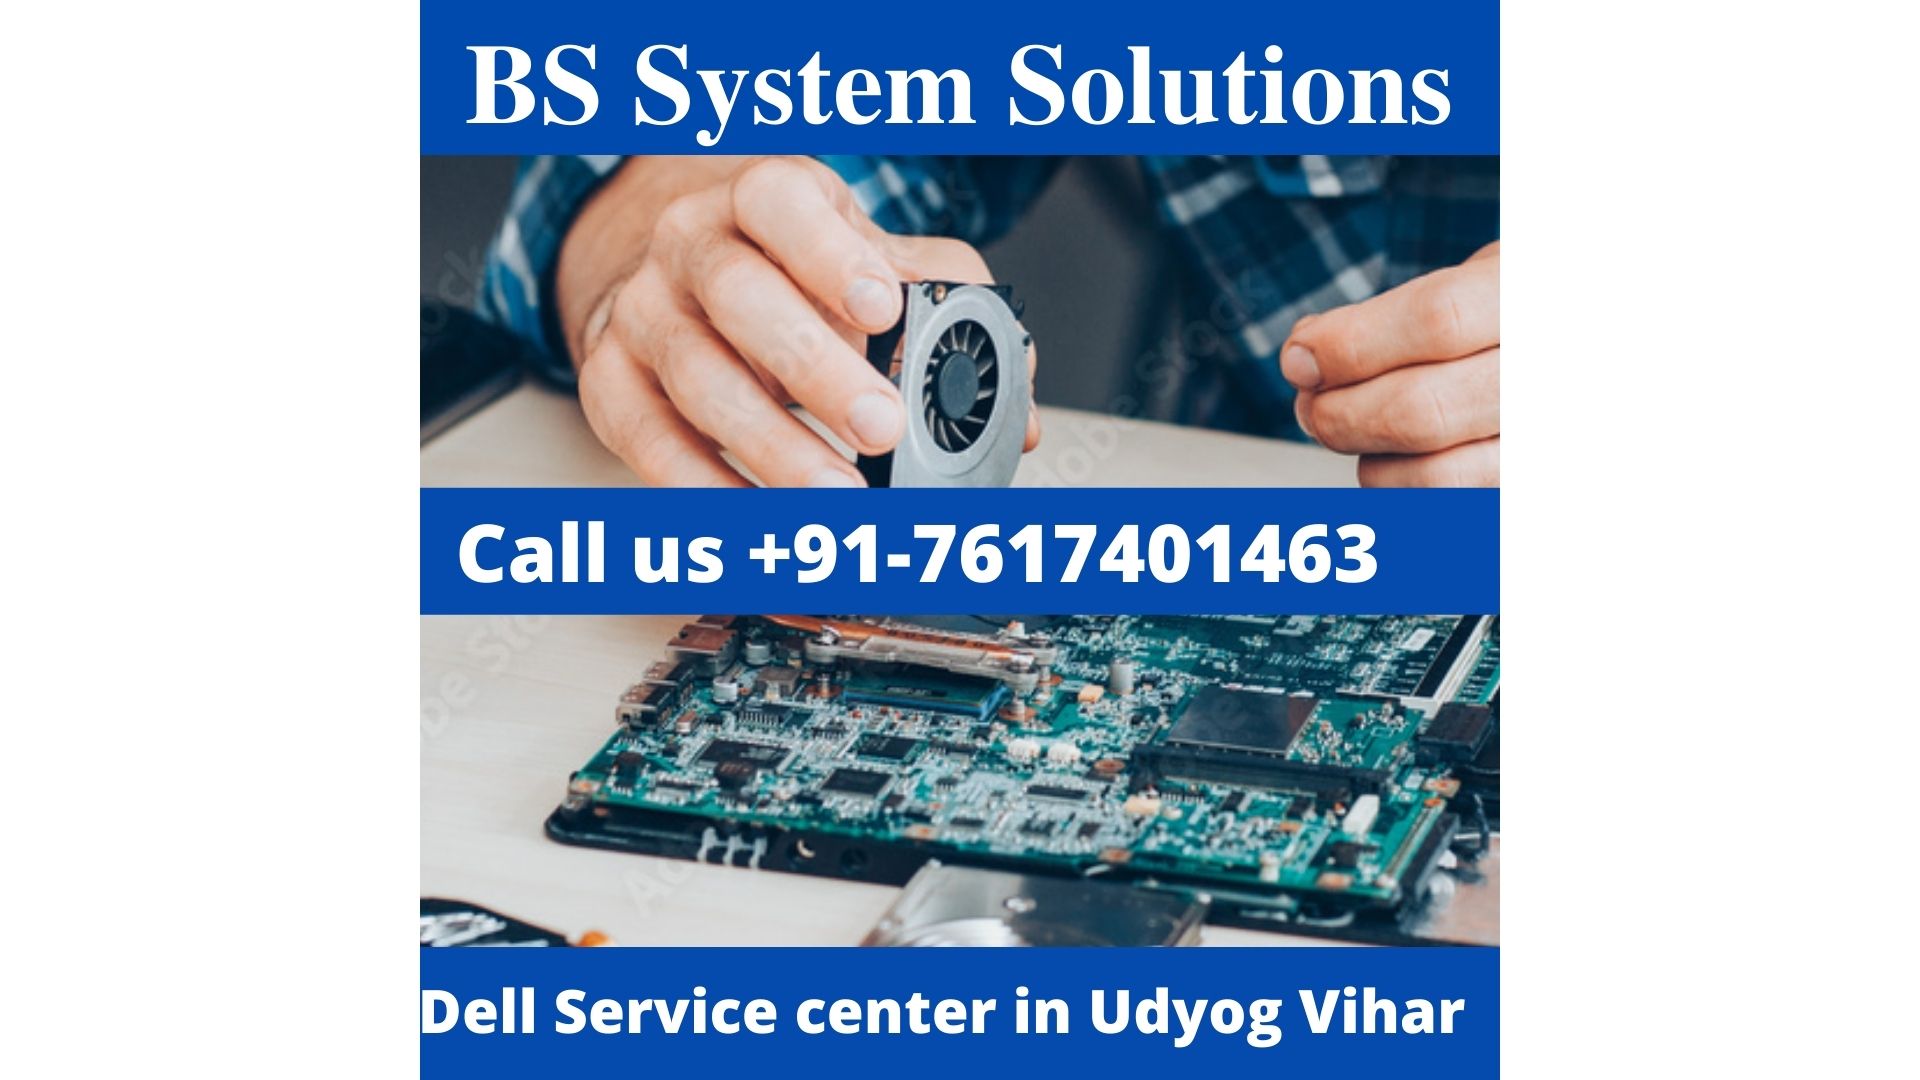 Dell Service Center in Udyog Vihar GurgaonServicesElectronics - Appliances RepairSouth DelhiOther